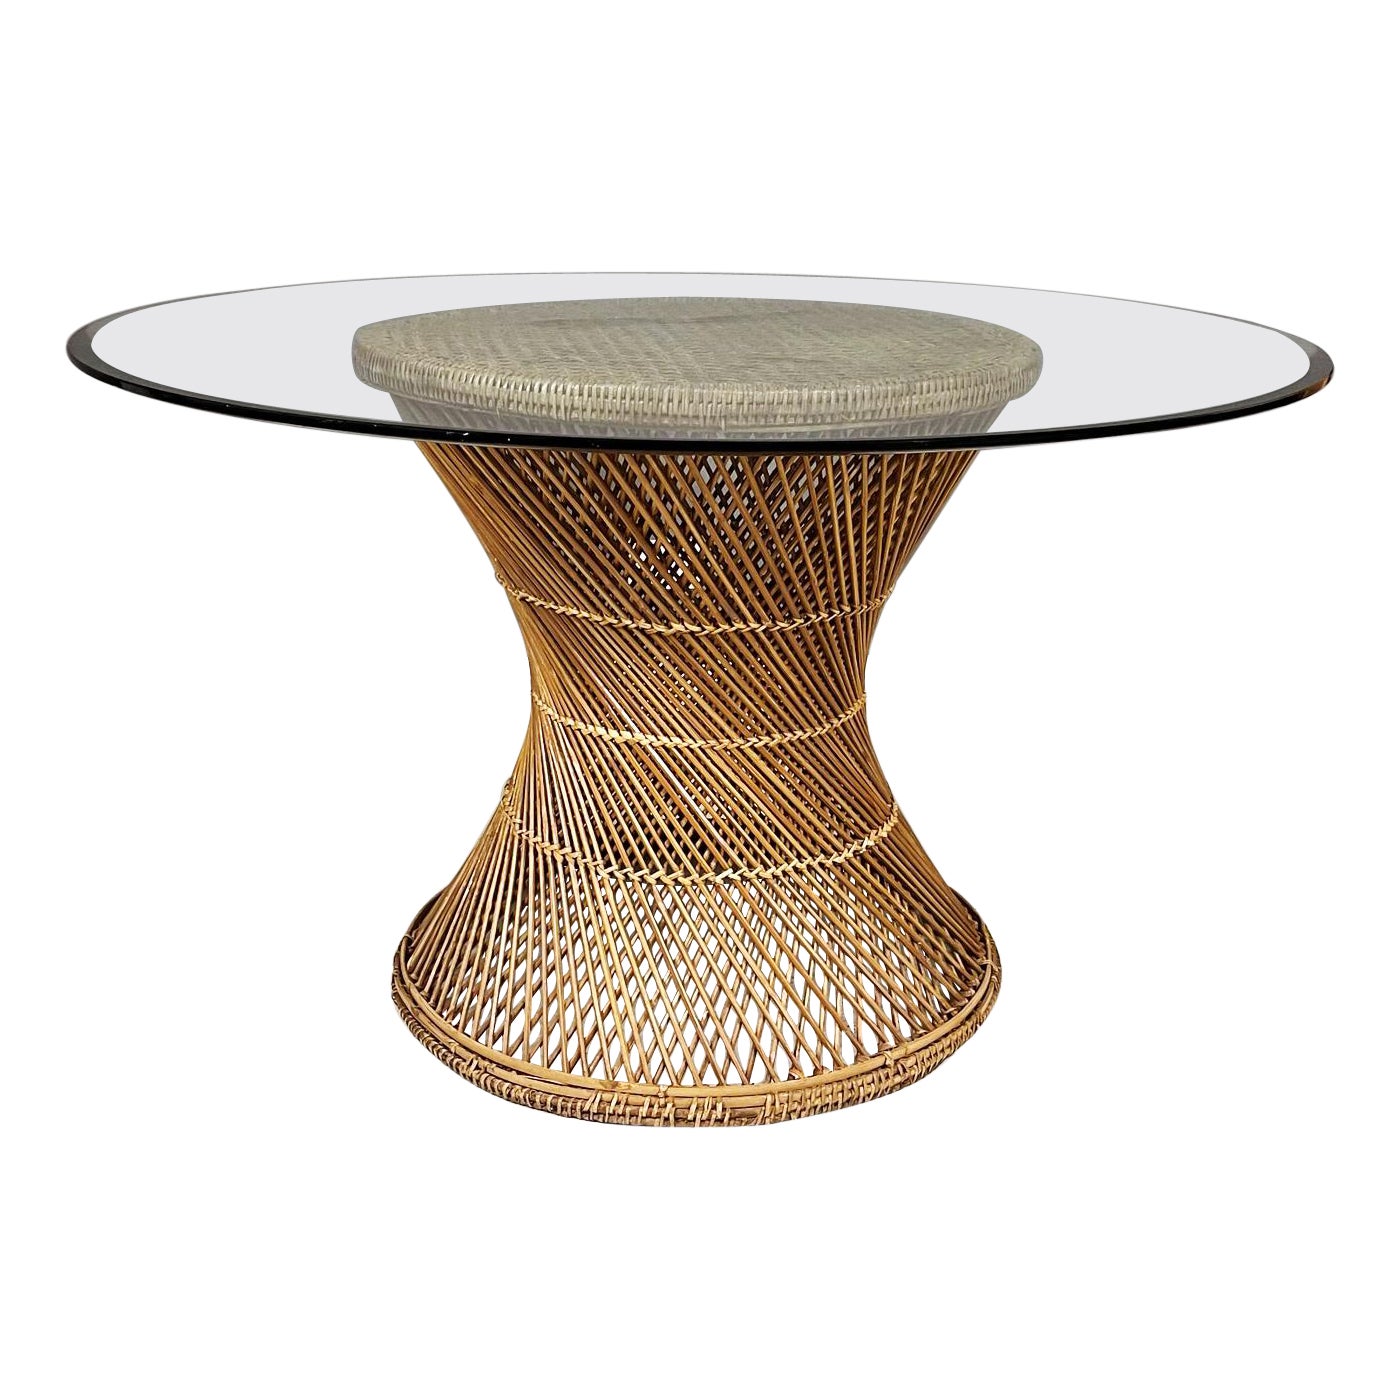 Italian mid-century Round dining table in grass and rattan, 1960s For Sale